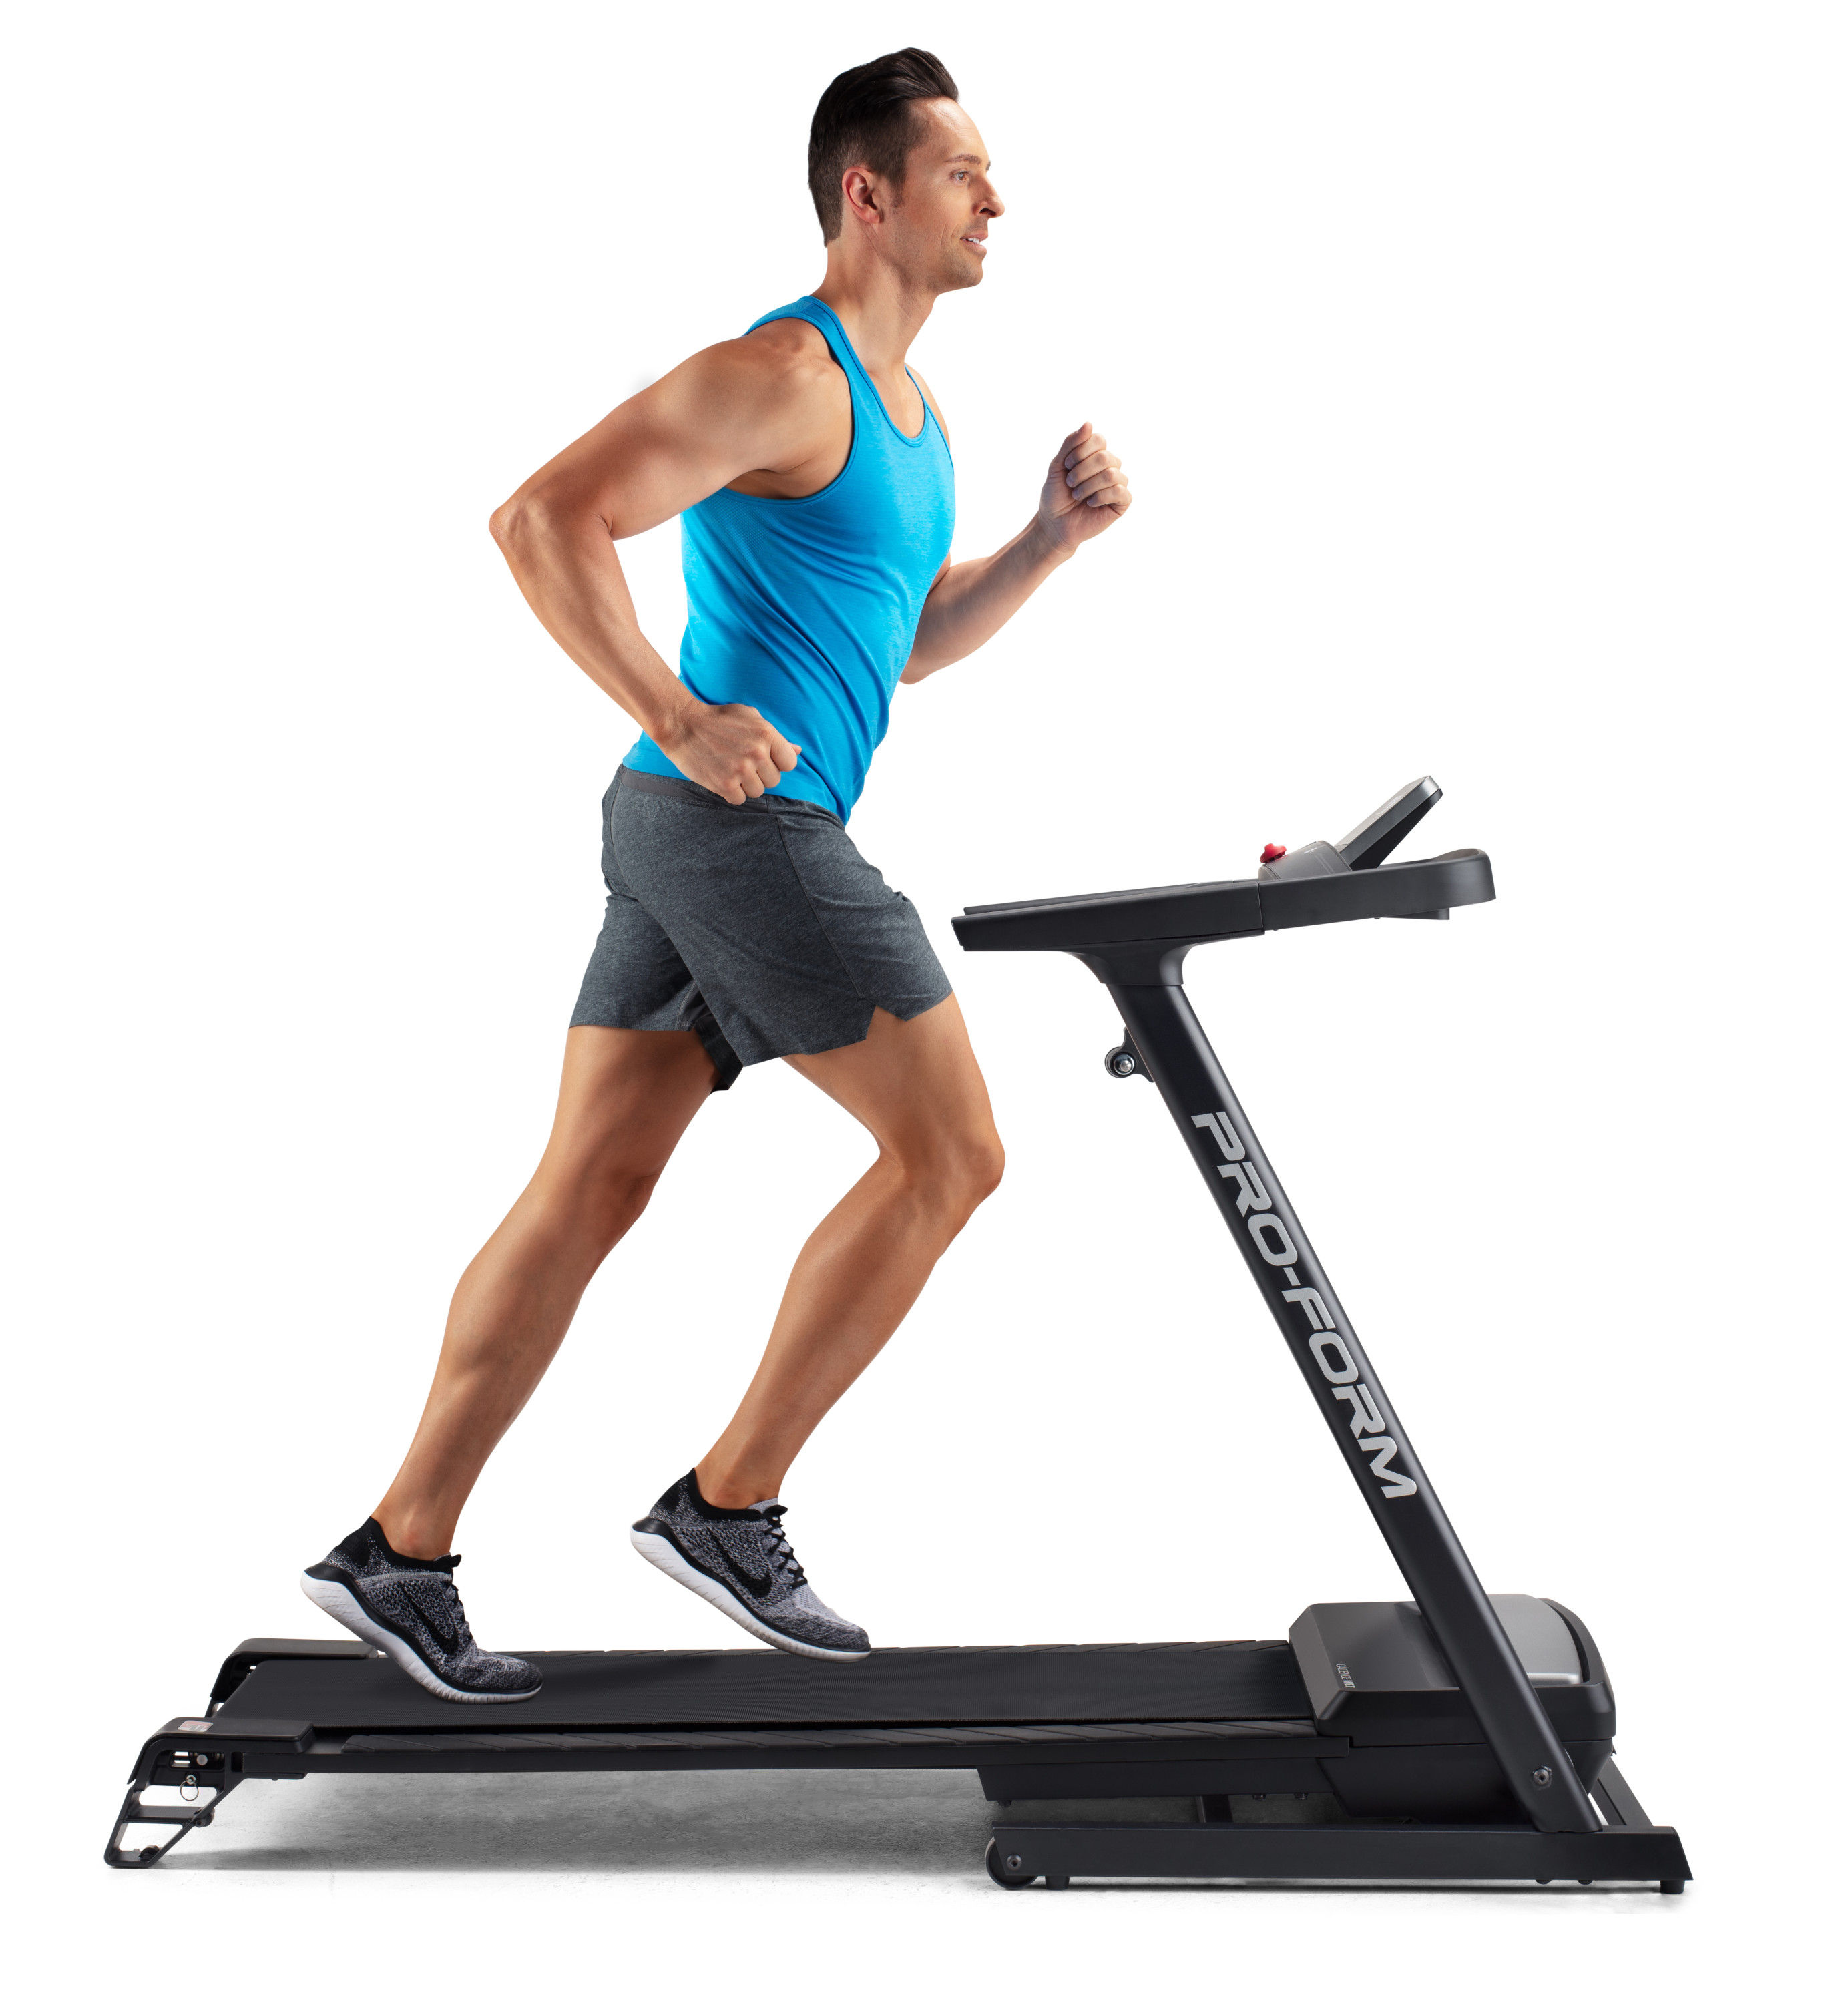 ProForm Cadence WLT Folding Treadmill with Reflex Deck for Walking and Jogging, iFit Bluetooth Enabled - image 28 of 31